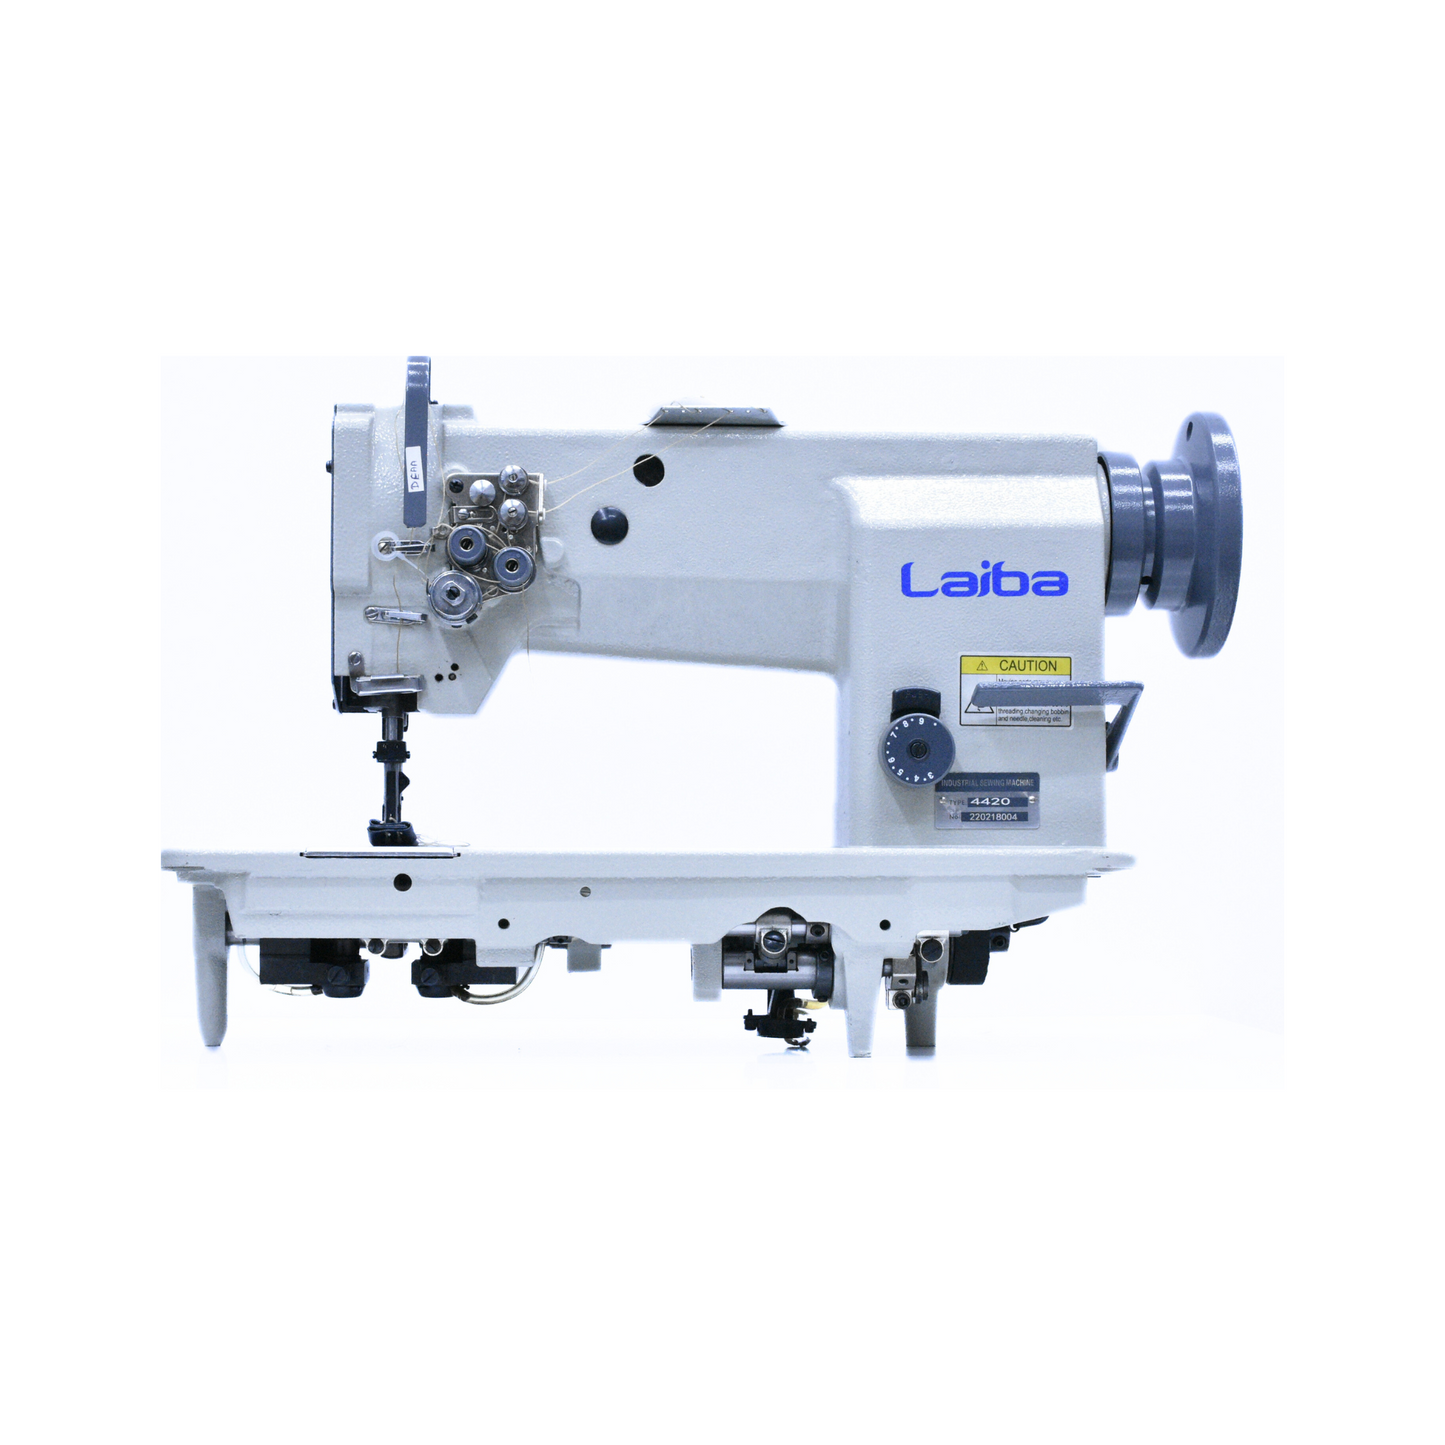 Laiba 4420 double needle industrial sewing machine